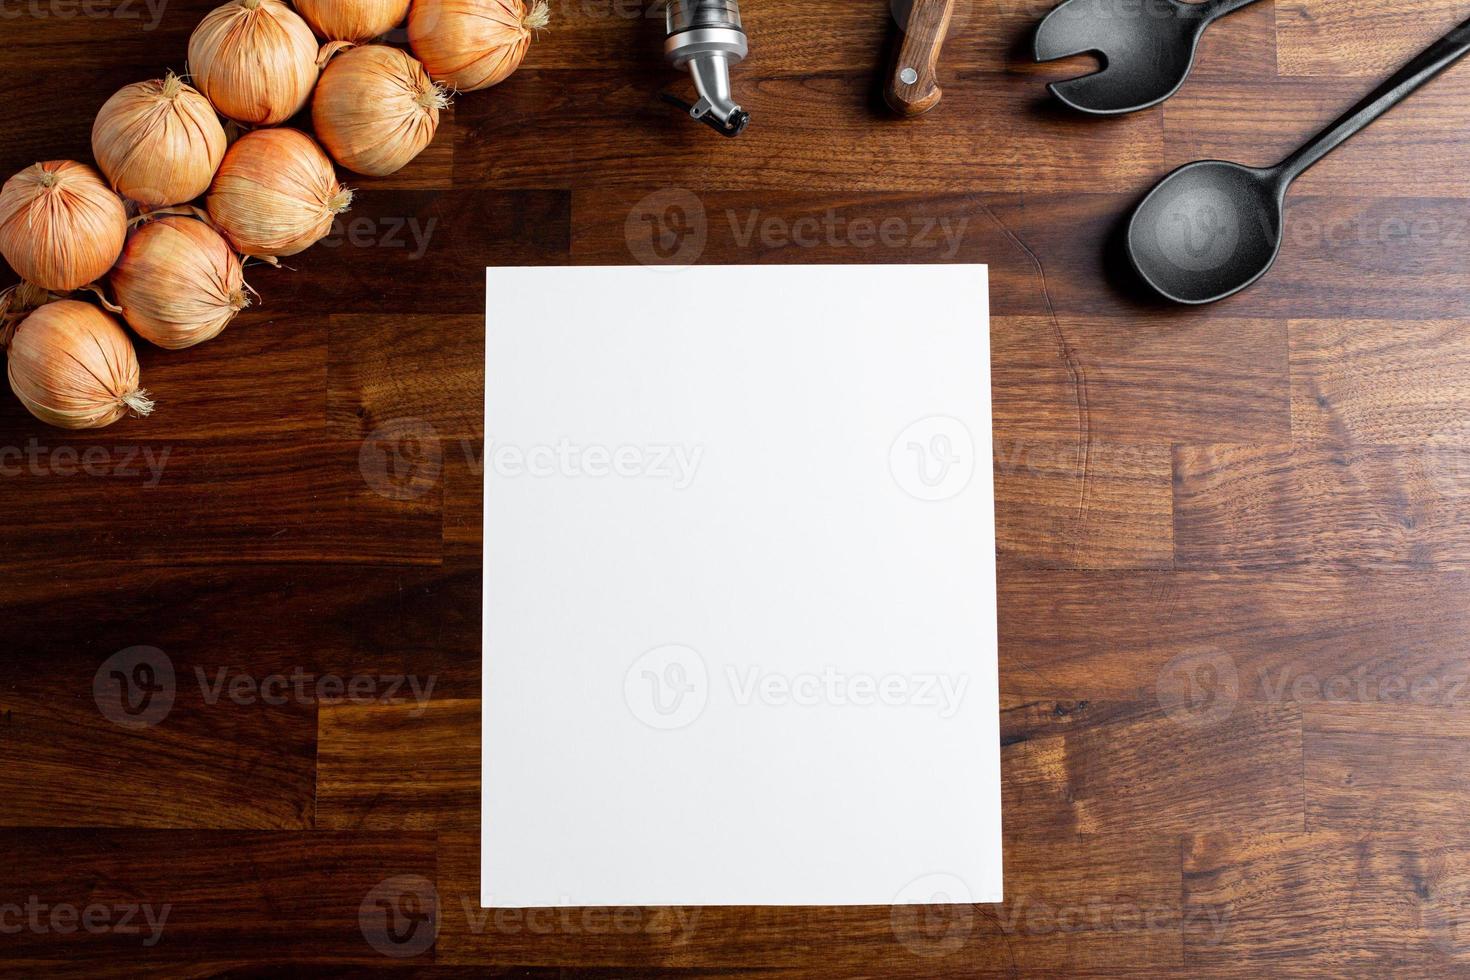 Hipster cafe menu empty mock up for concept design. Business concept. Template design. Information concept with kitchen objects on wooden table photo